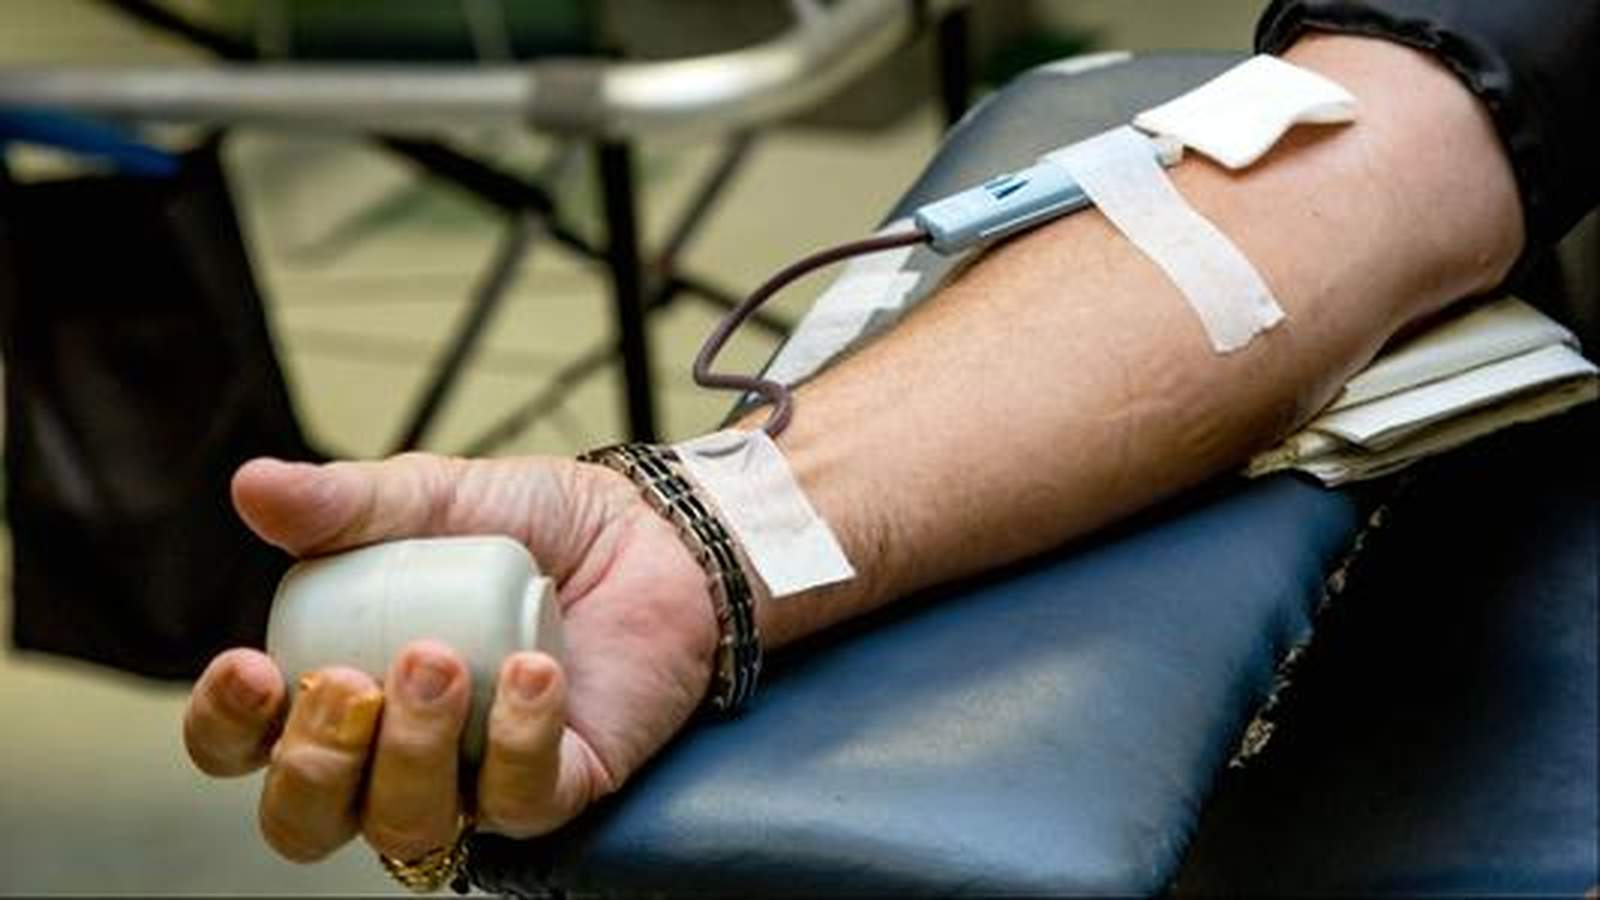 Blood centers around the country in need of donations